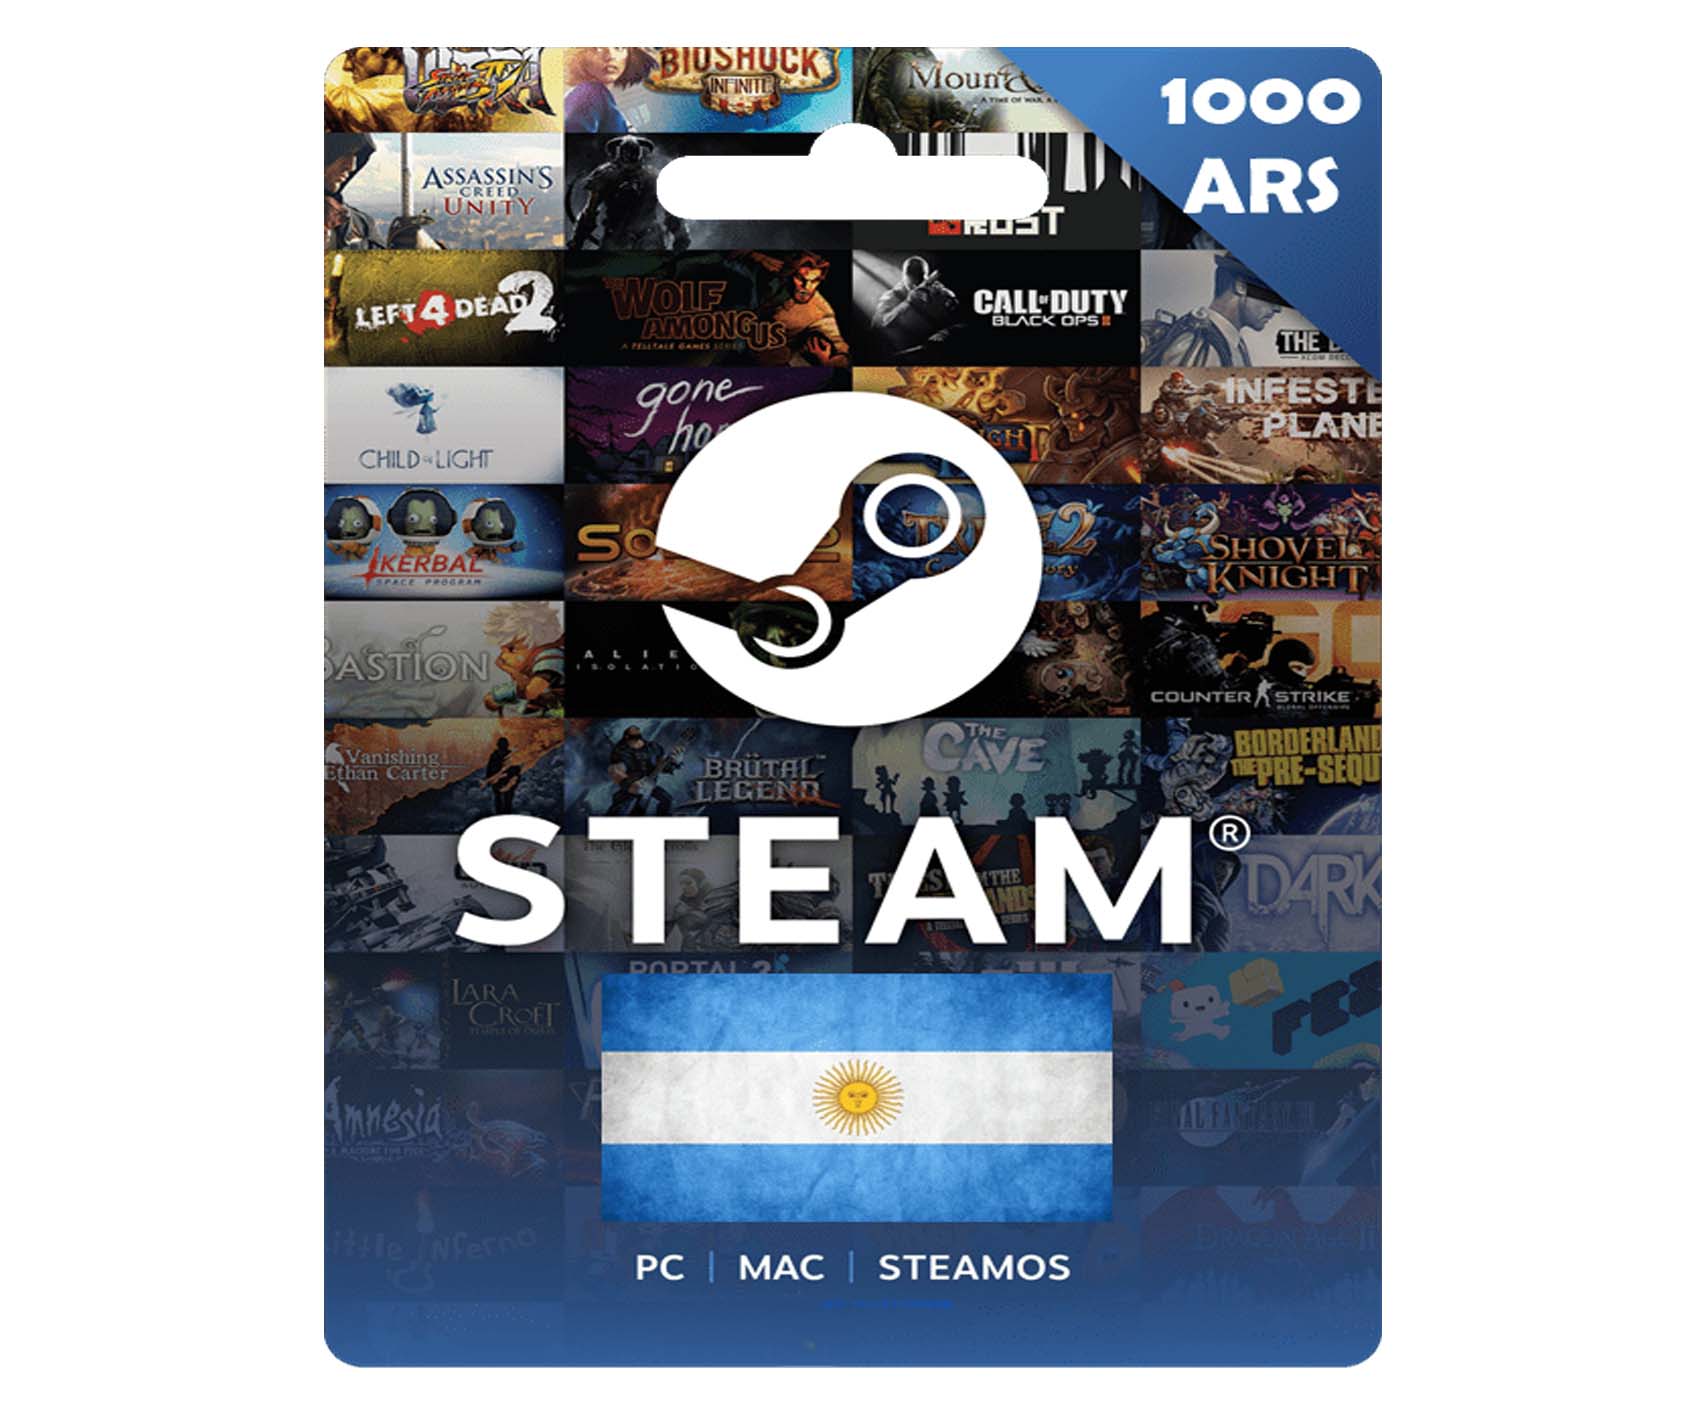 Can you put money on steam фото 54